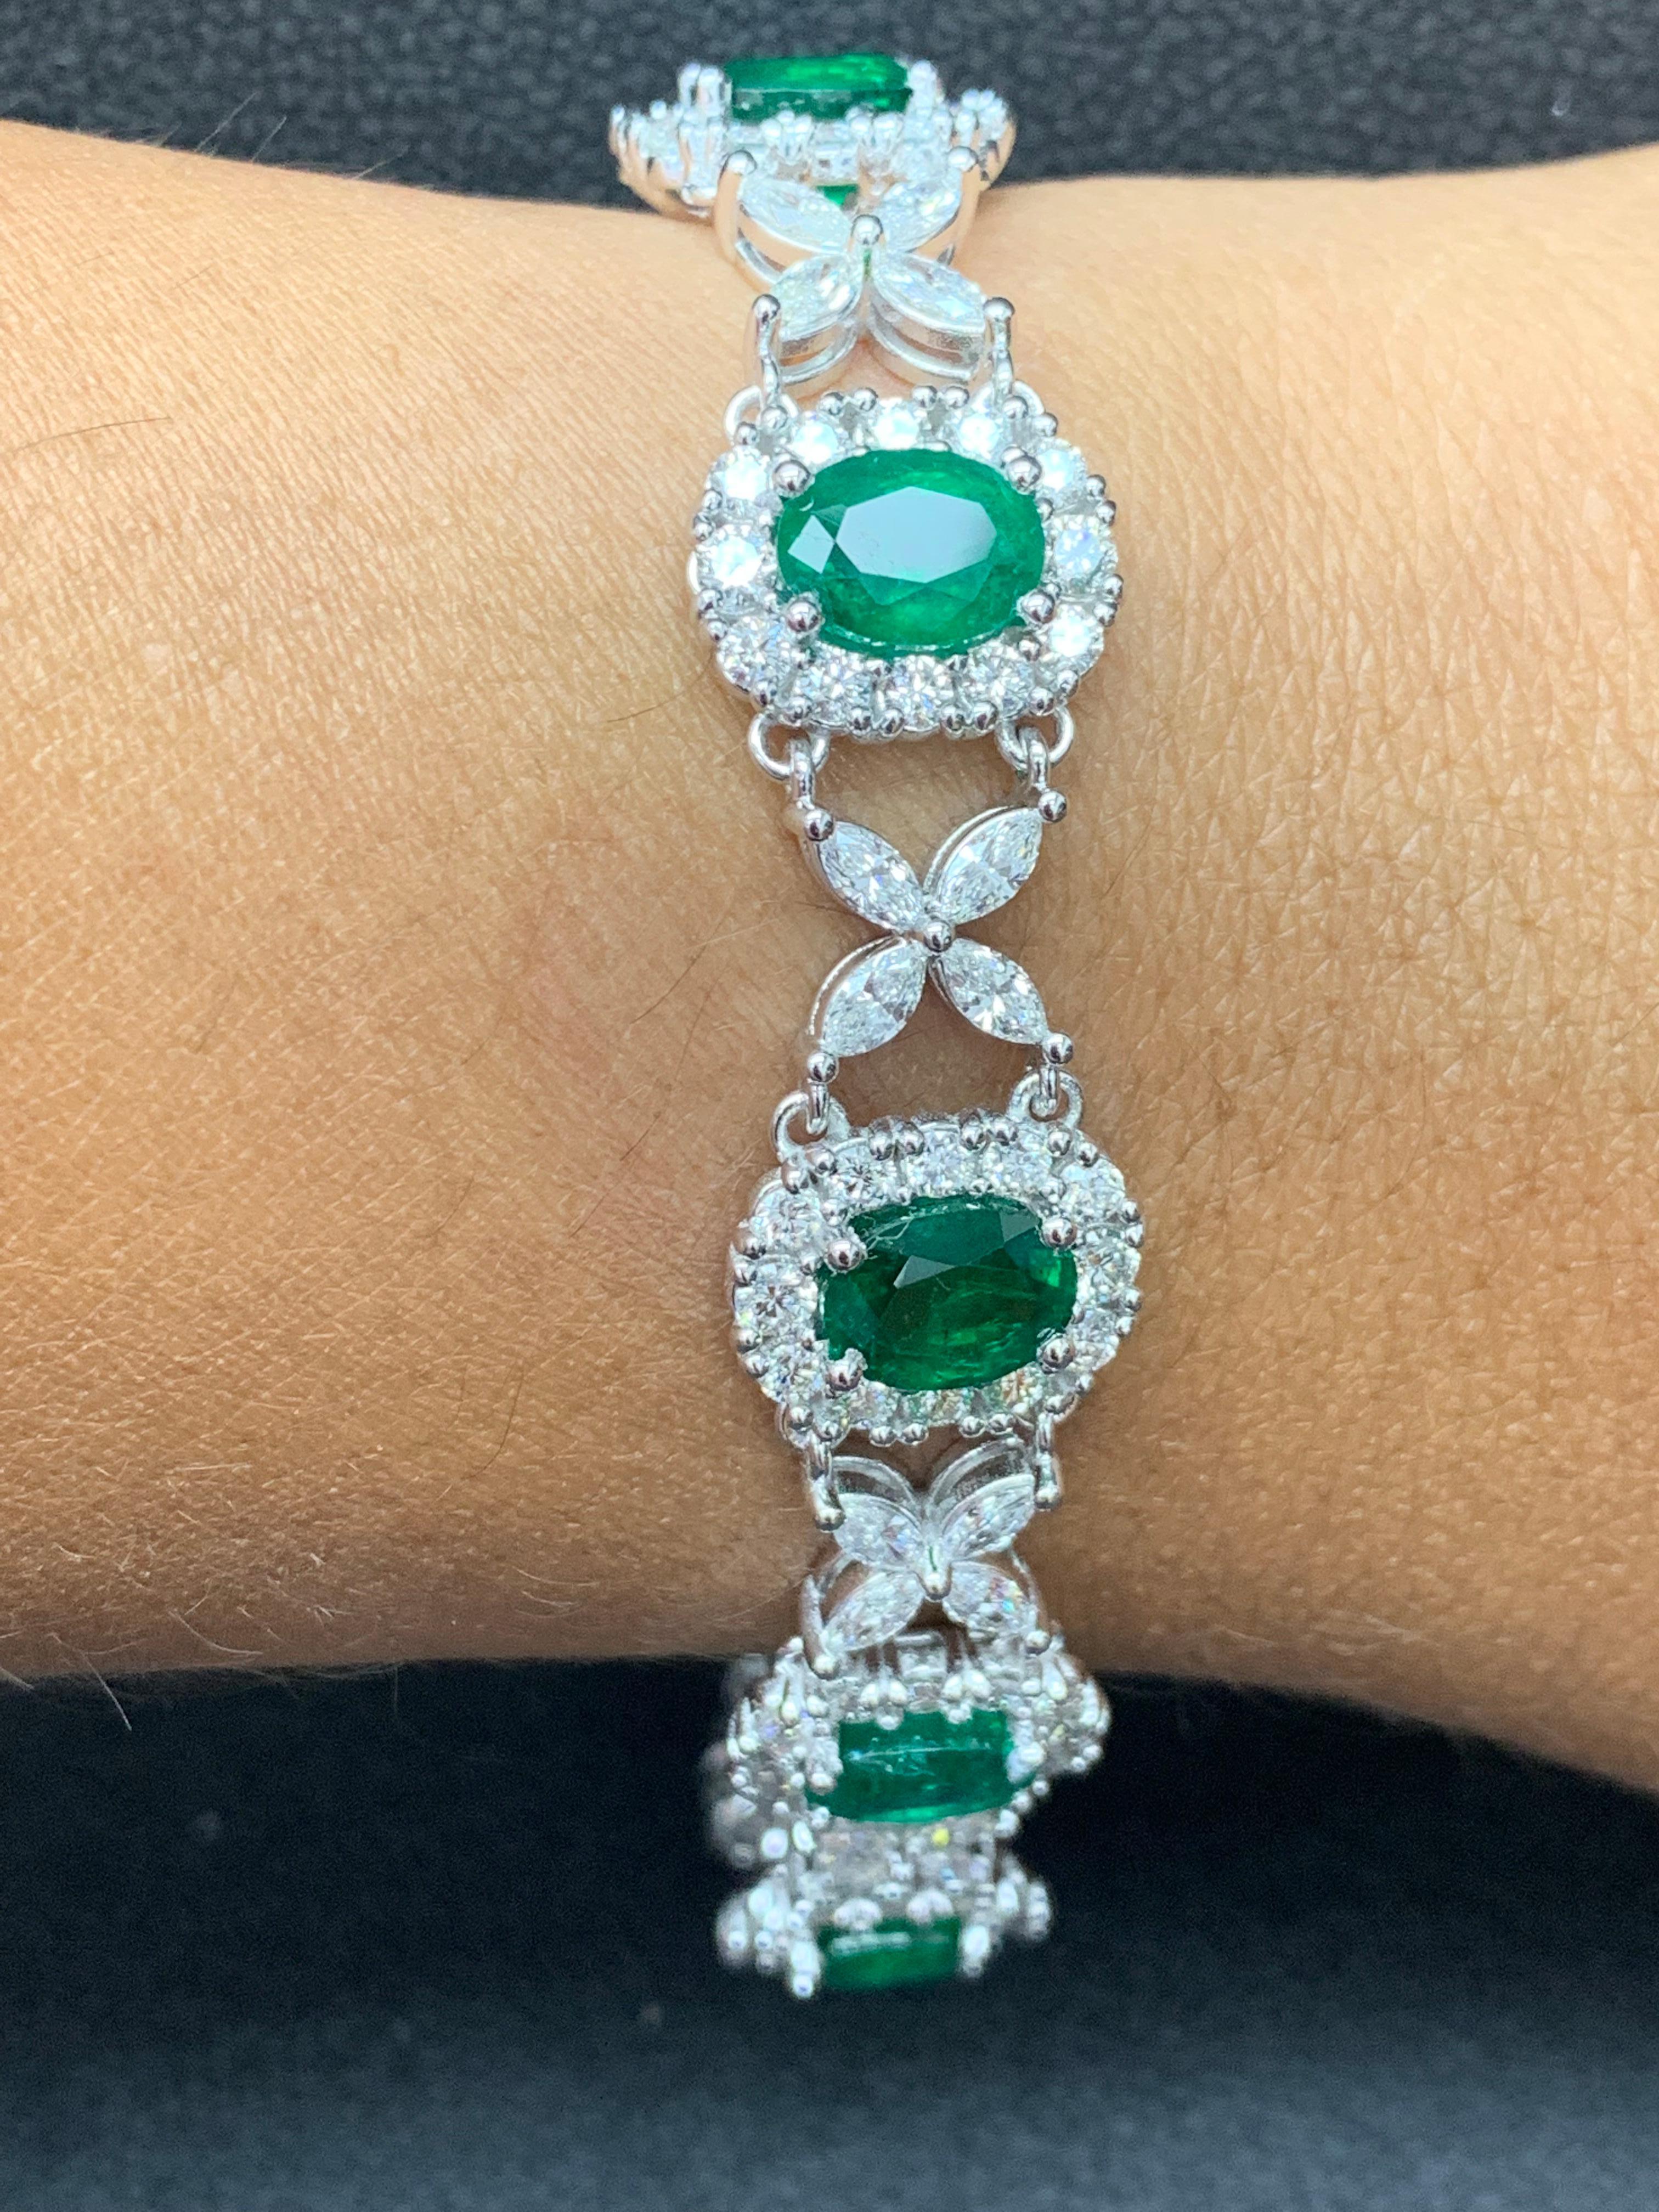 10.52 Carat Oval Cut Emerald and Diamond Tennis Bracelet in 14K White Gold For Sale 7